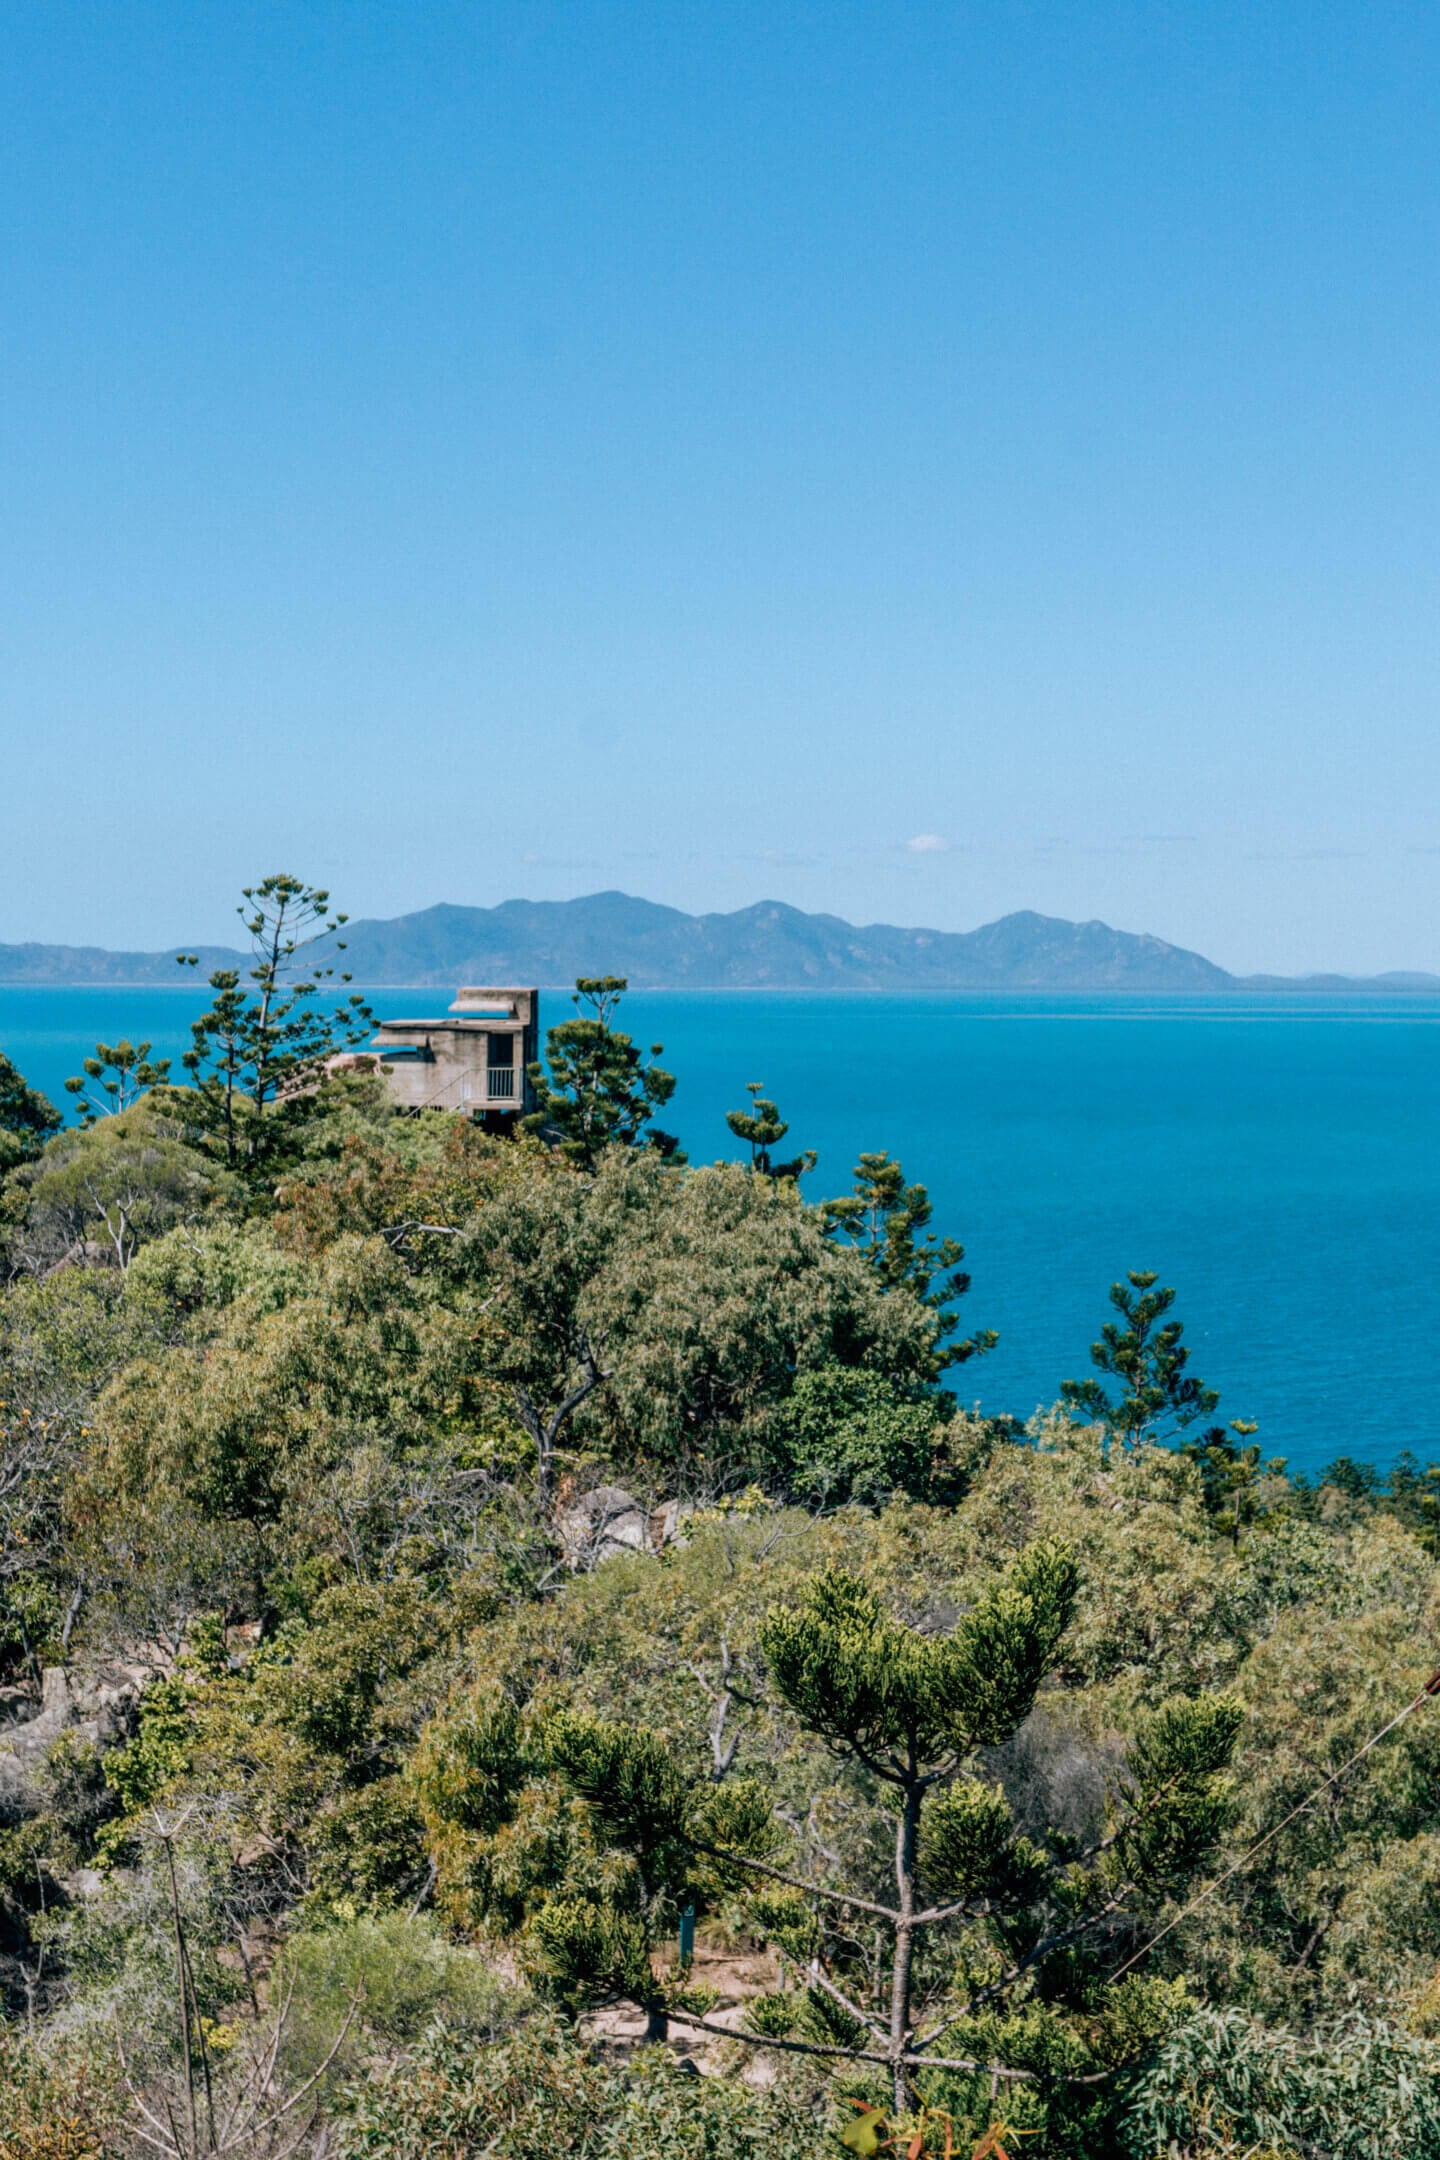 One of the WWII forts on Magnetic island